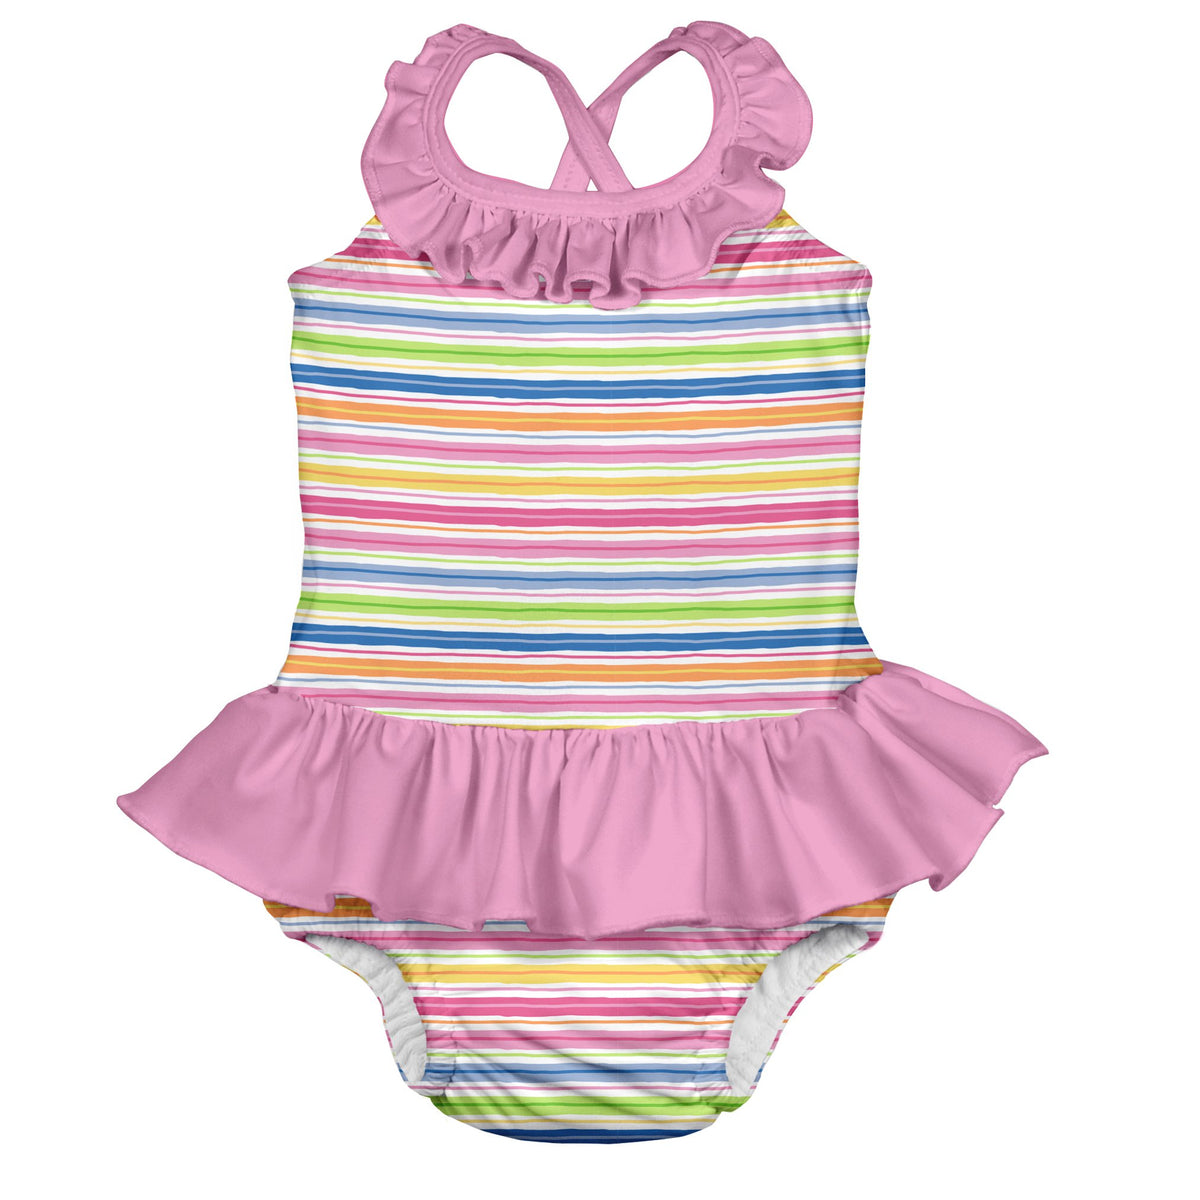 Ruffle Swimsuit with built in Swim Nappy - Pink Wavy